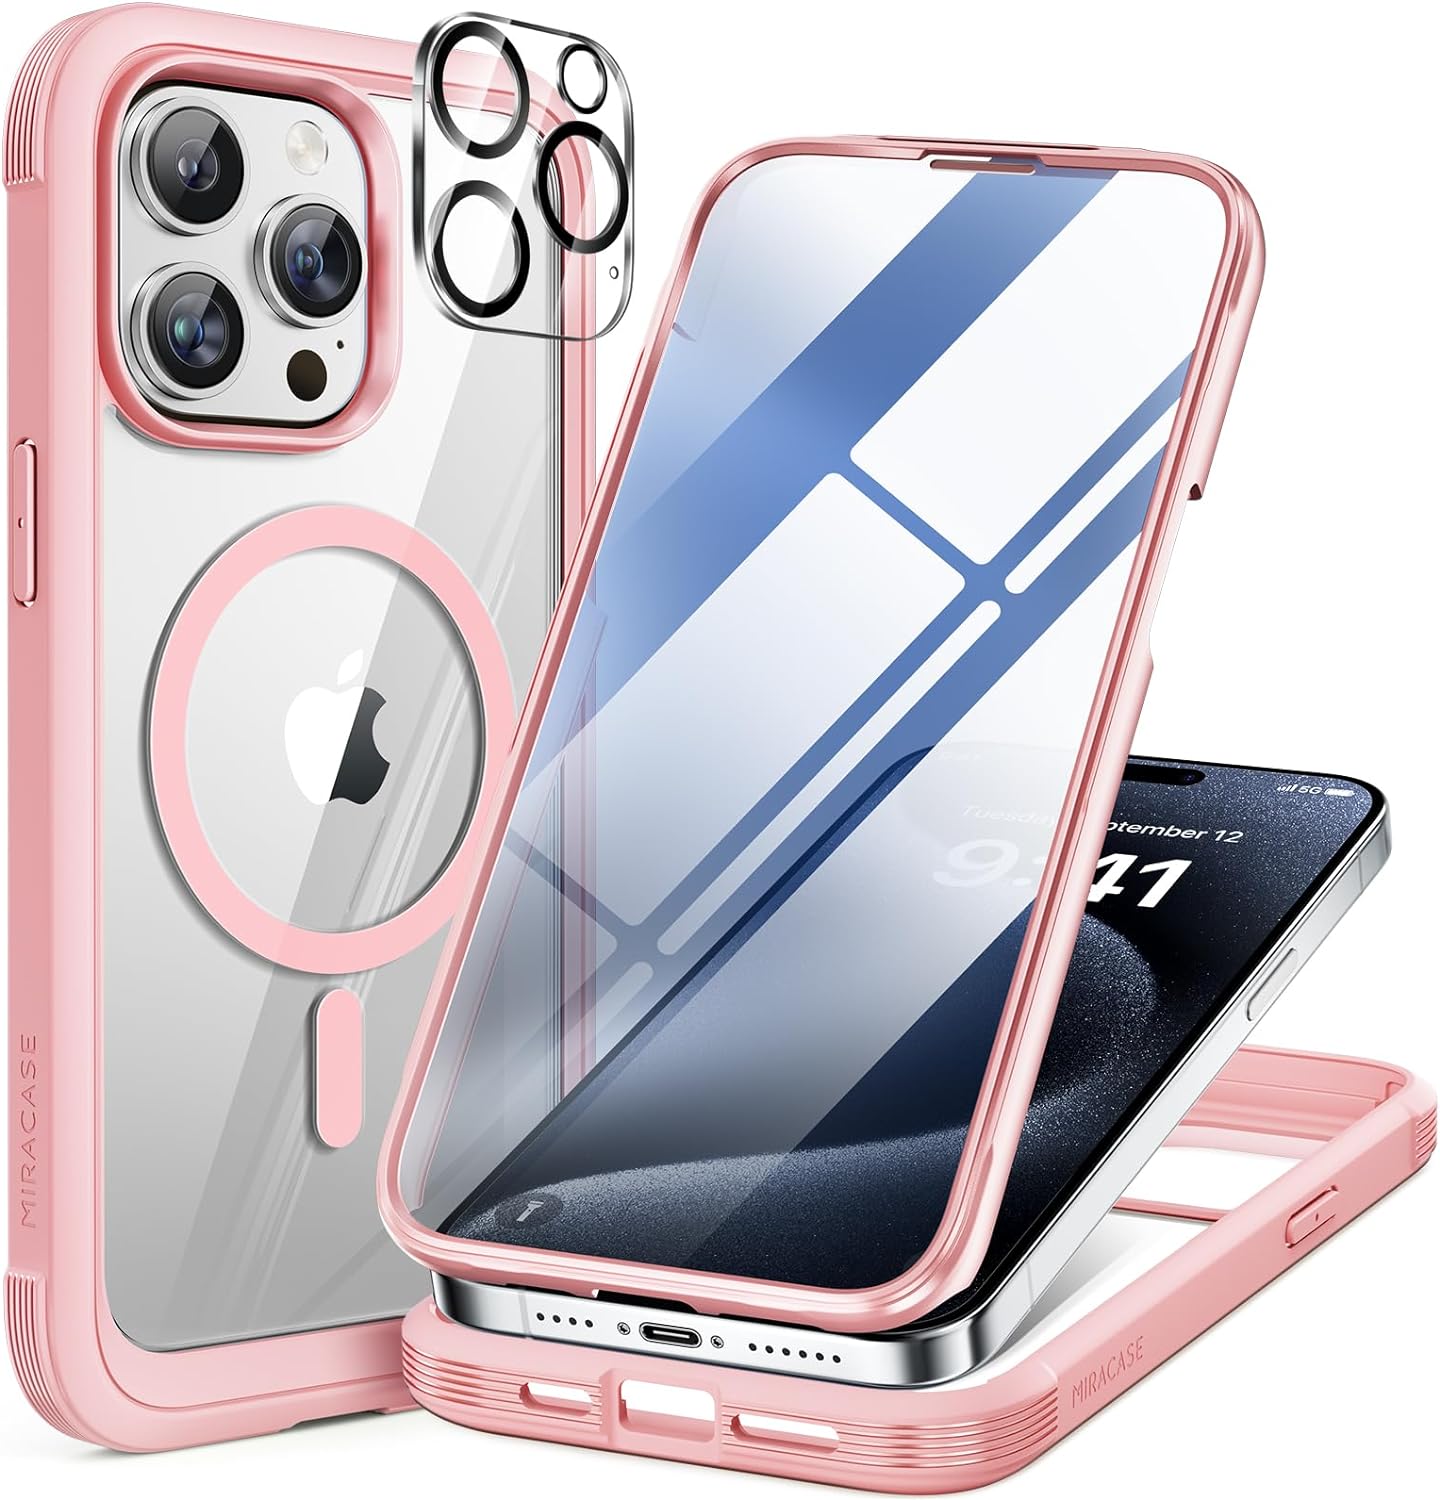 iPhone 15 Pro Max - Pink : Cases Villa 360° Protection Case 9H Tempered Glass Cover with MagSafe